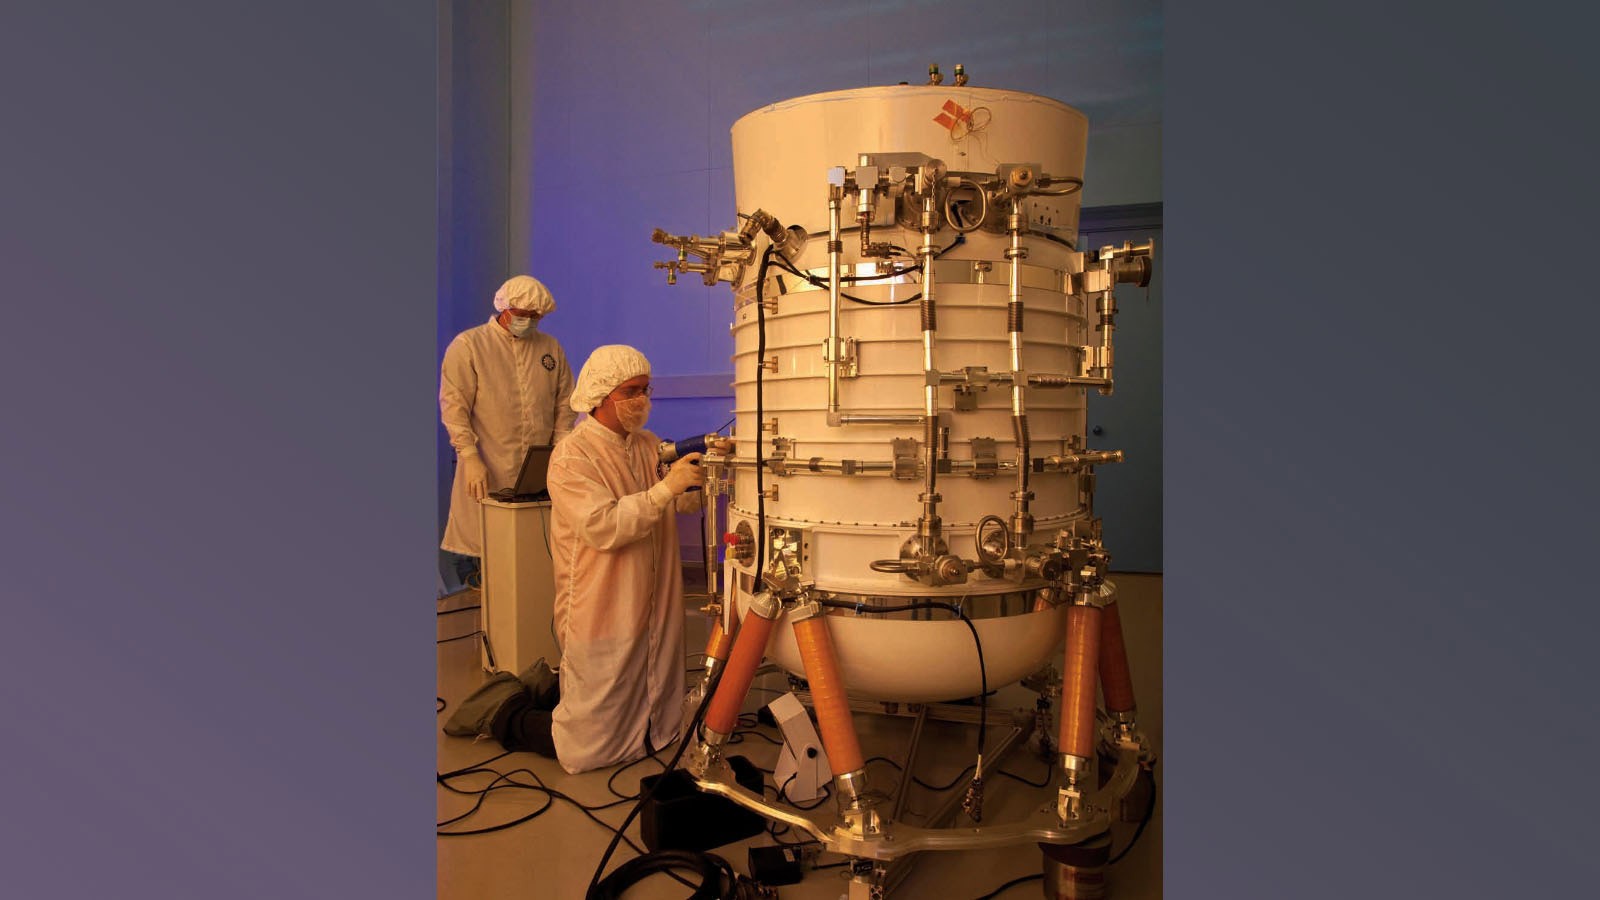 This image shows engineers from the Space Dynamics Laboratory working on the WISE.